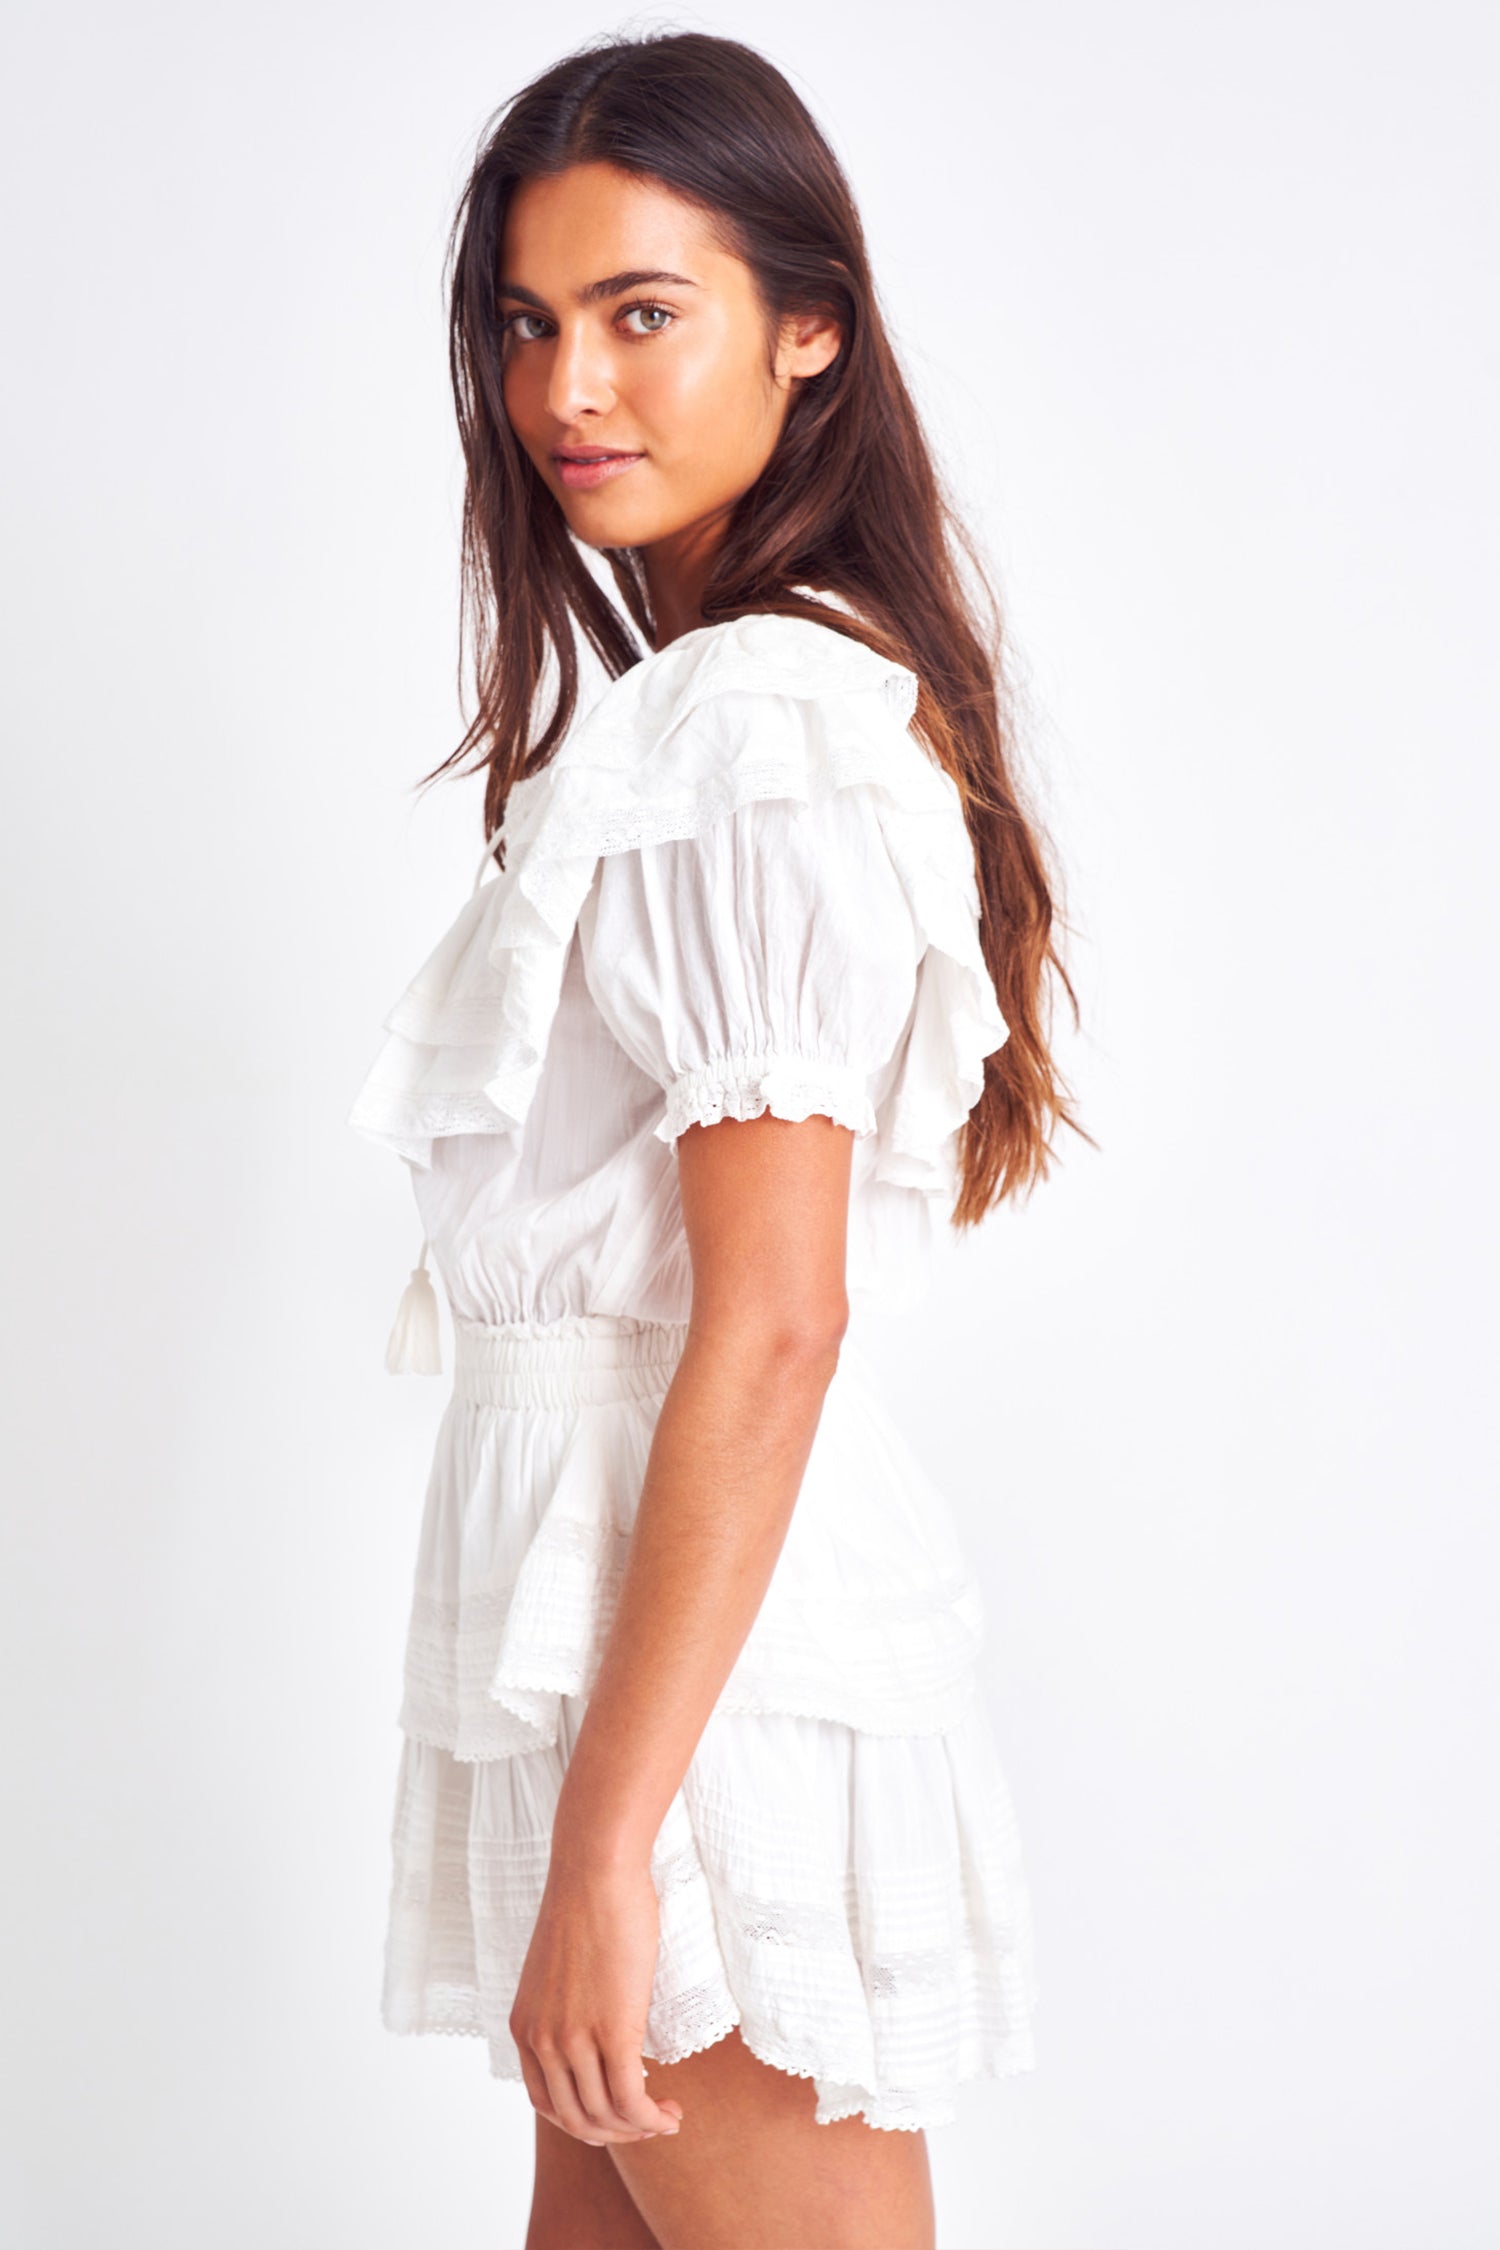 The Liv dress is a vintage inspired dress and features a puff sleeve and a double tiered yoke top. It has a ruffled mini skirt which brings in a feminine look along with front ties to finish the scoop neckline, and a cinched elastic waist. 